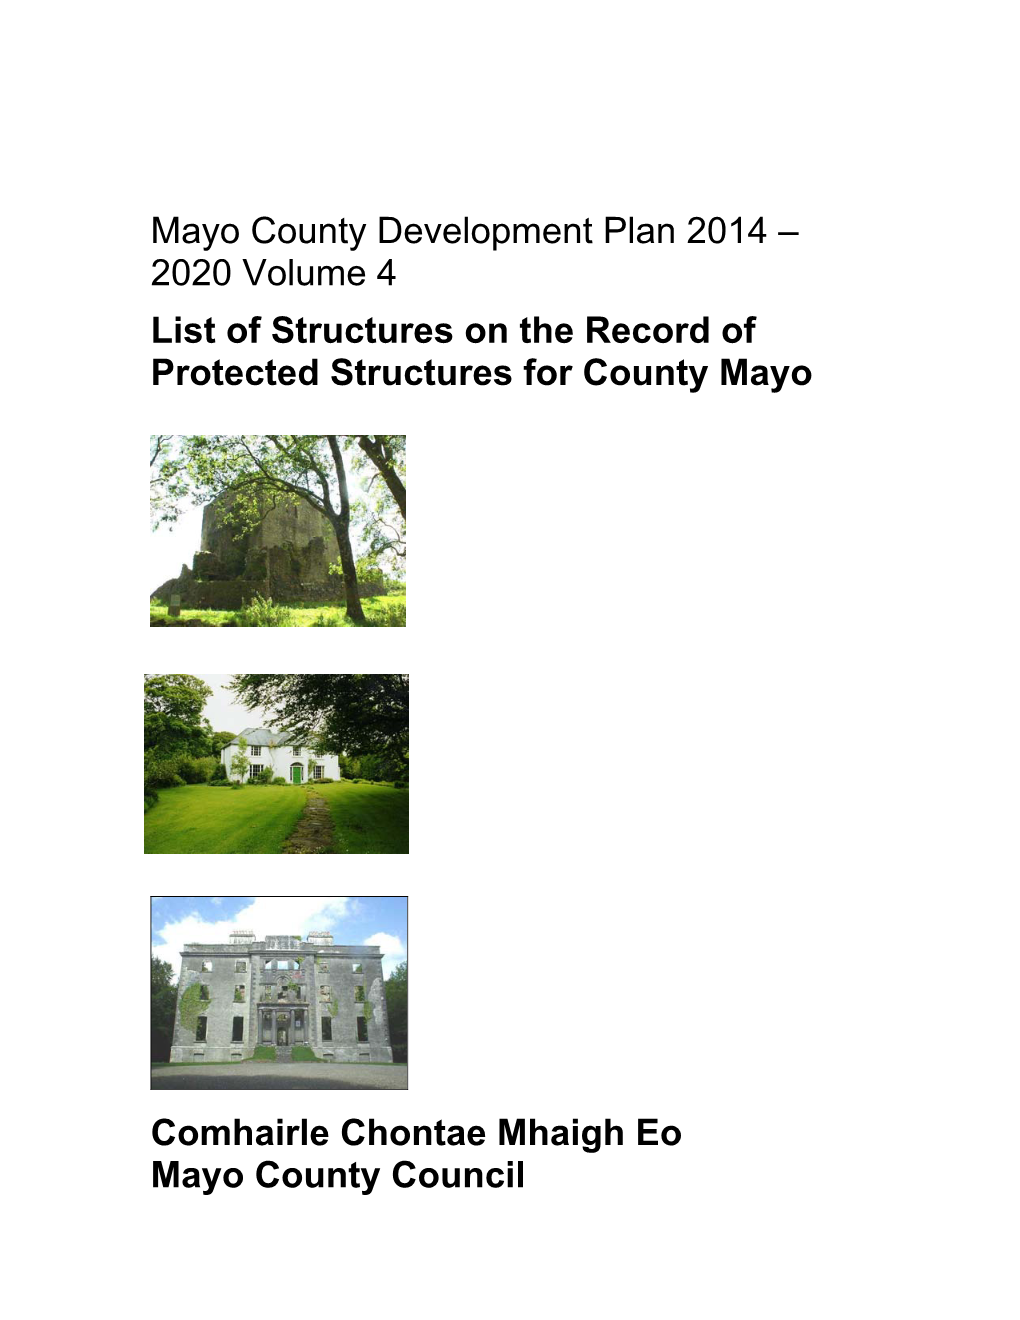 Record of Protected Structures for County Mayo